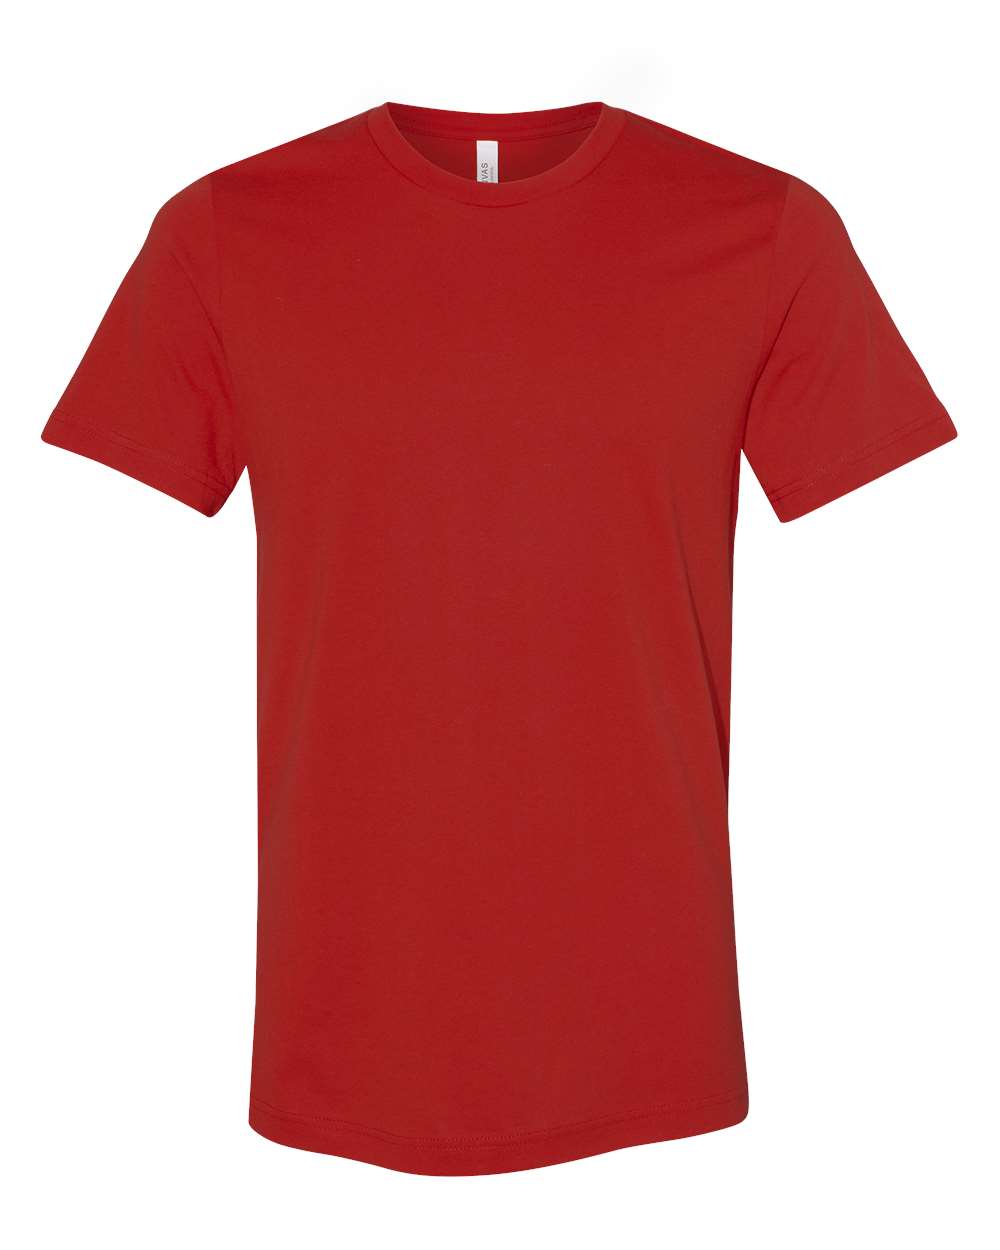 Pretreated BELLA+CANVAS 3001 Unisex Jersey Tee - Red